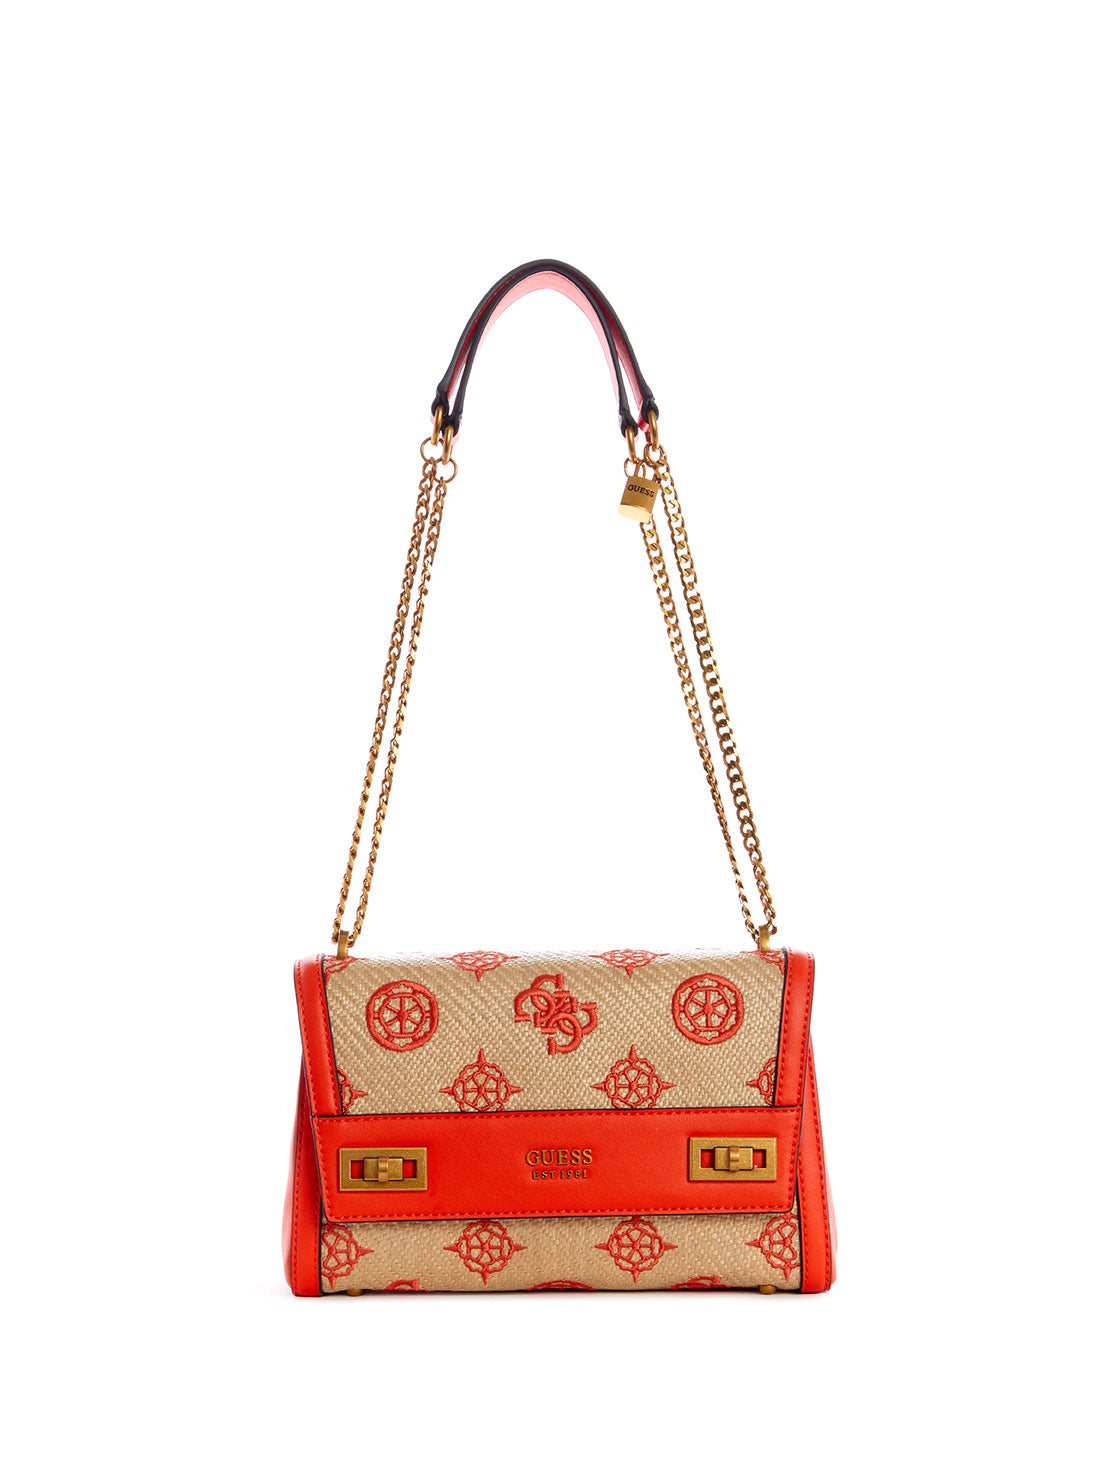 GUESS Women's Red Katey Raffia Shoulder Bag RB787019 Front View